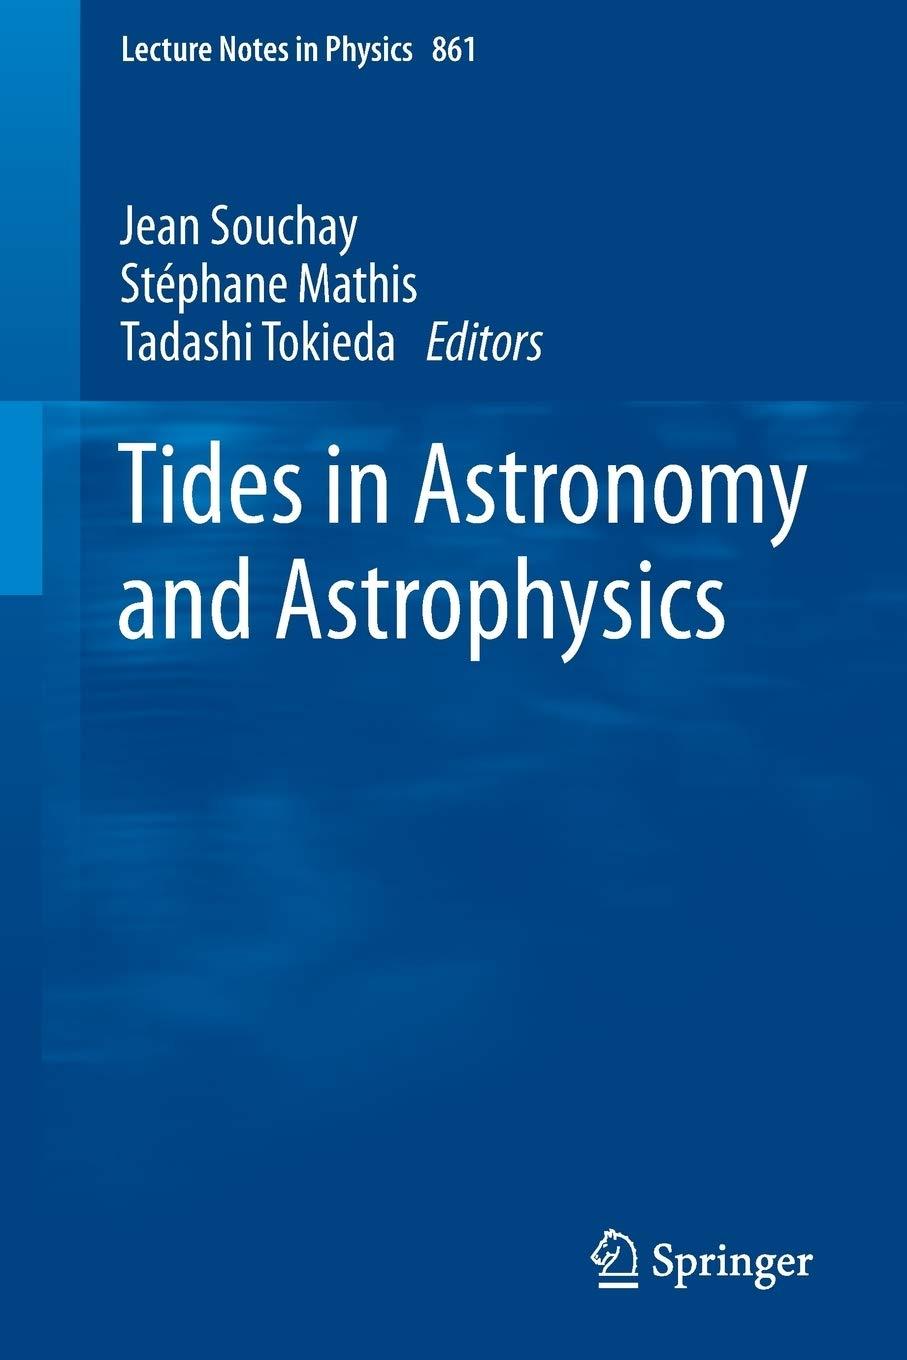 tides in astronomy and astrophysics 1st edition jean souchay, stéphane mathis, tadashi tokieda 3642329608,